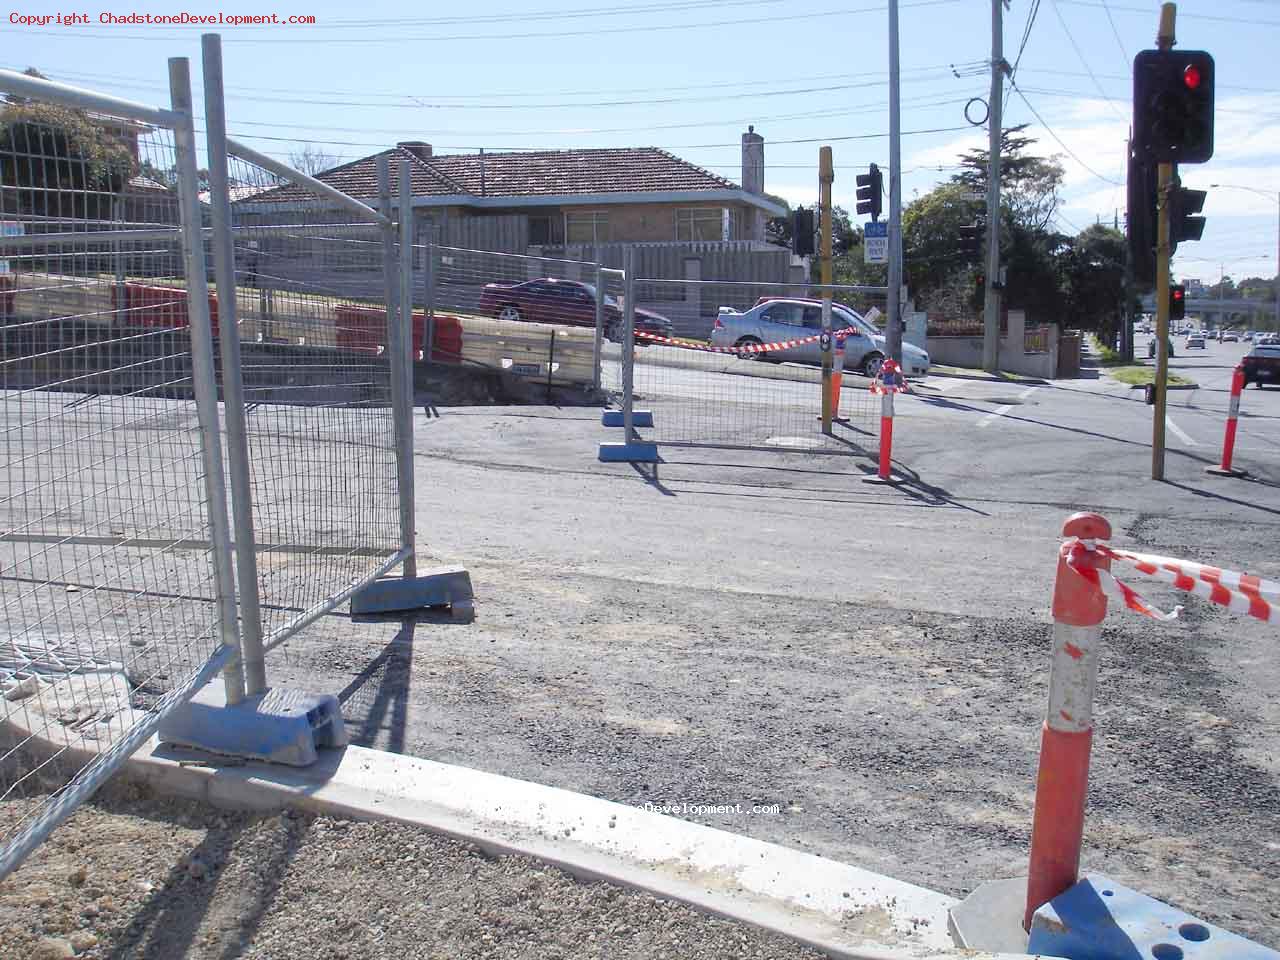 New intersection as seen from pedestrian crossing - Chadstone Development Discussions